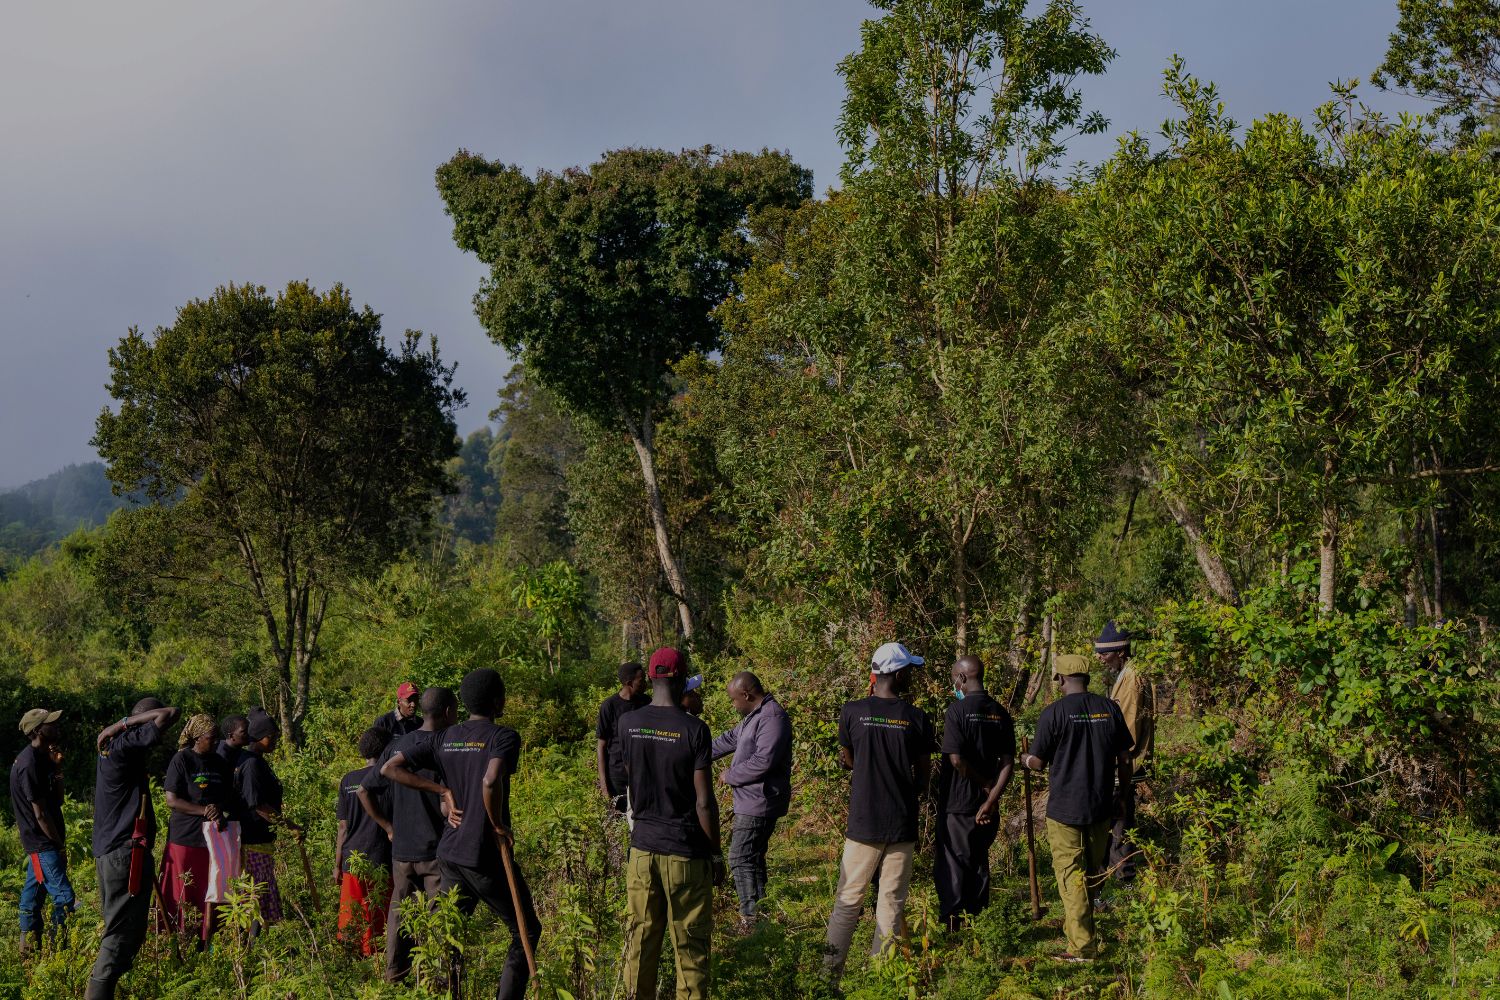 Local community workers at tree planting site in the forest